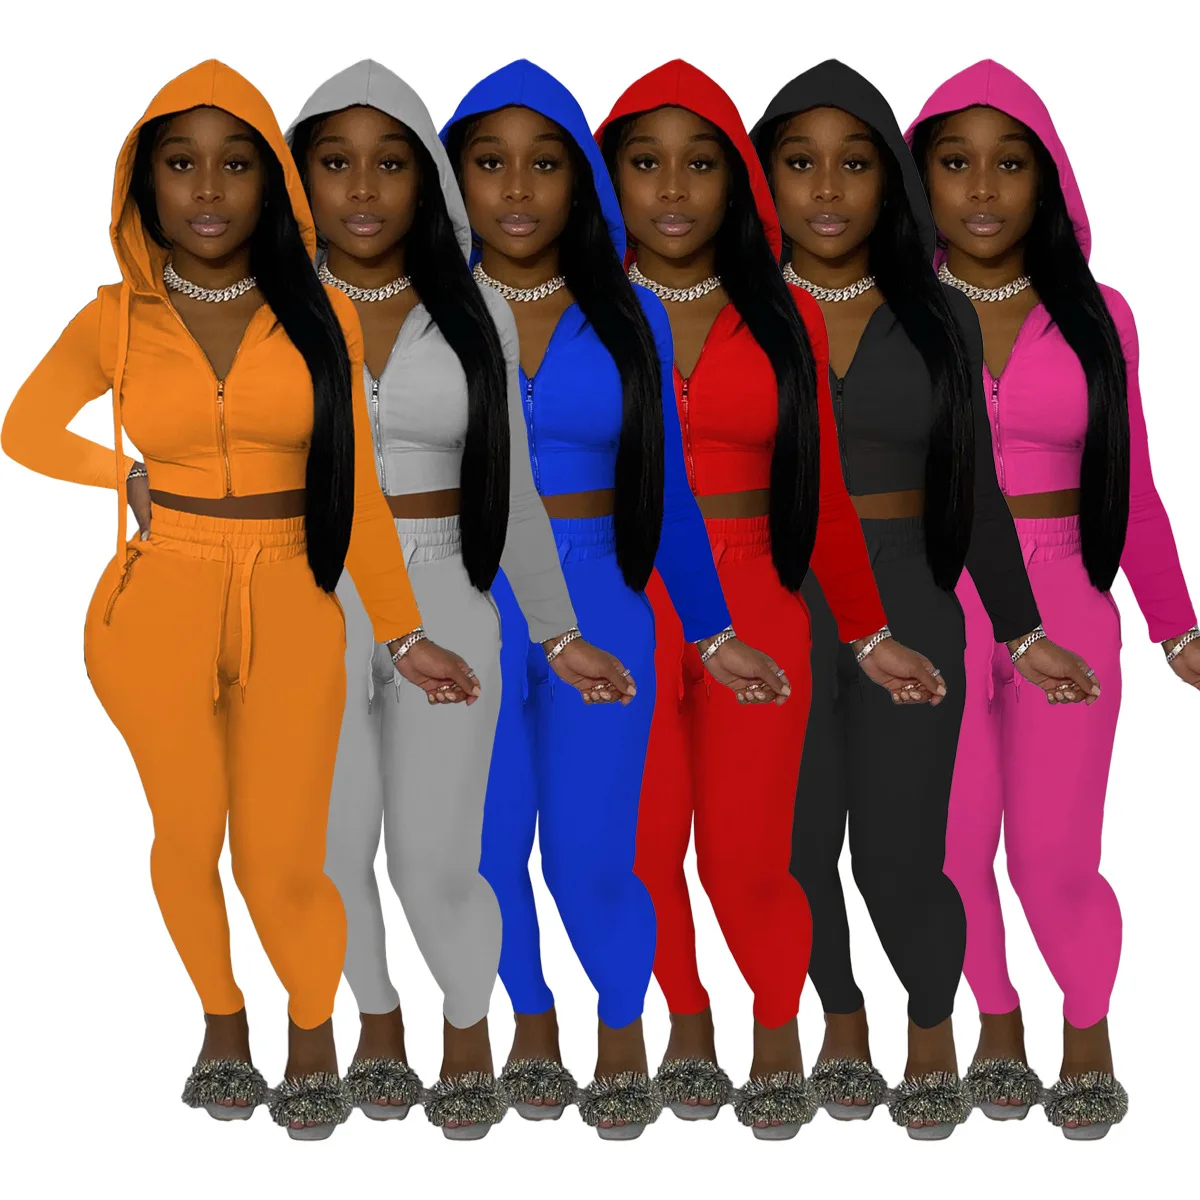 

Latest Women's Hoody Fall Two Piece Set Zipper Sportswear Outfits Solid Colors Jogger Women 2 Piece Set fashion sweatsuit outfit, Photo color